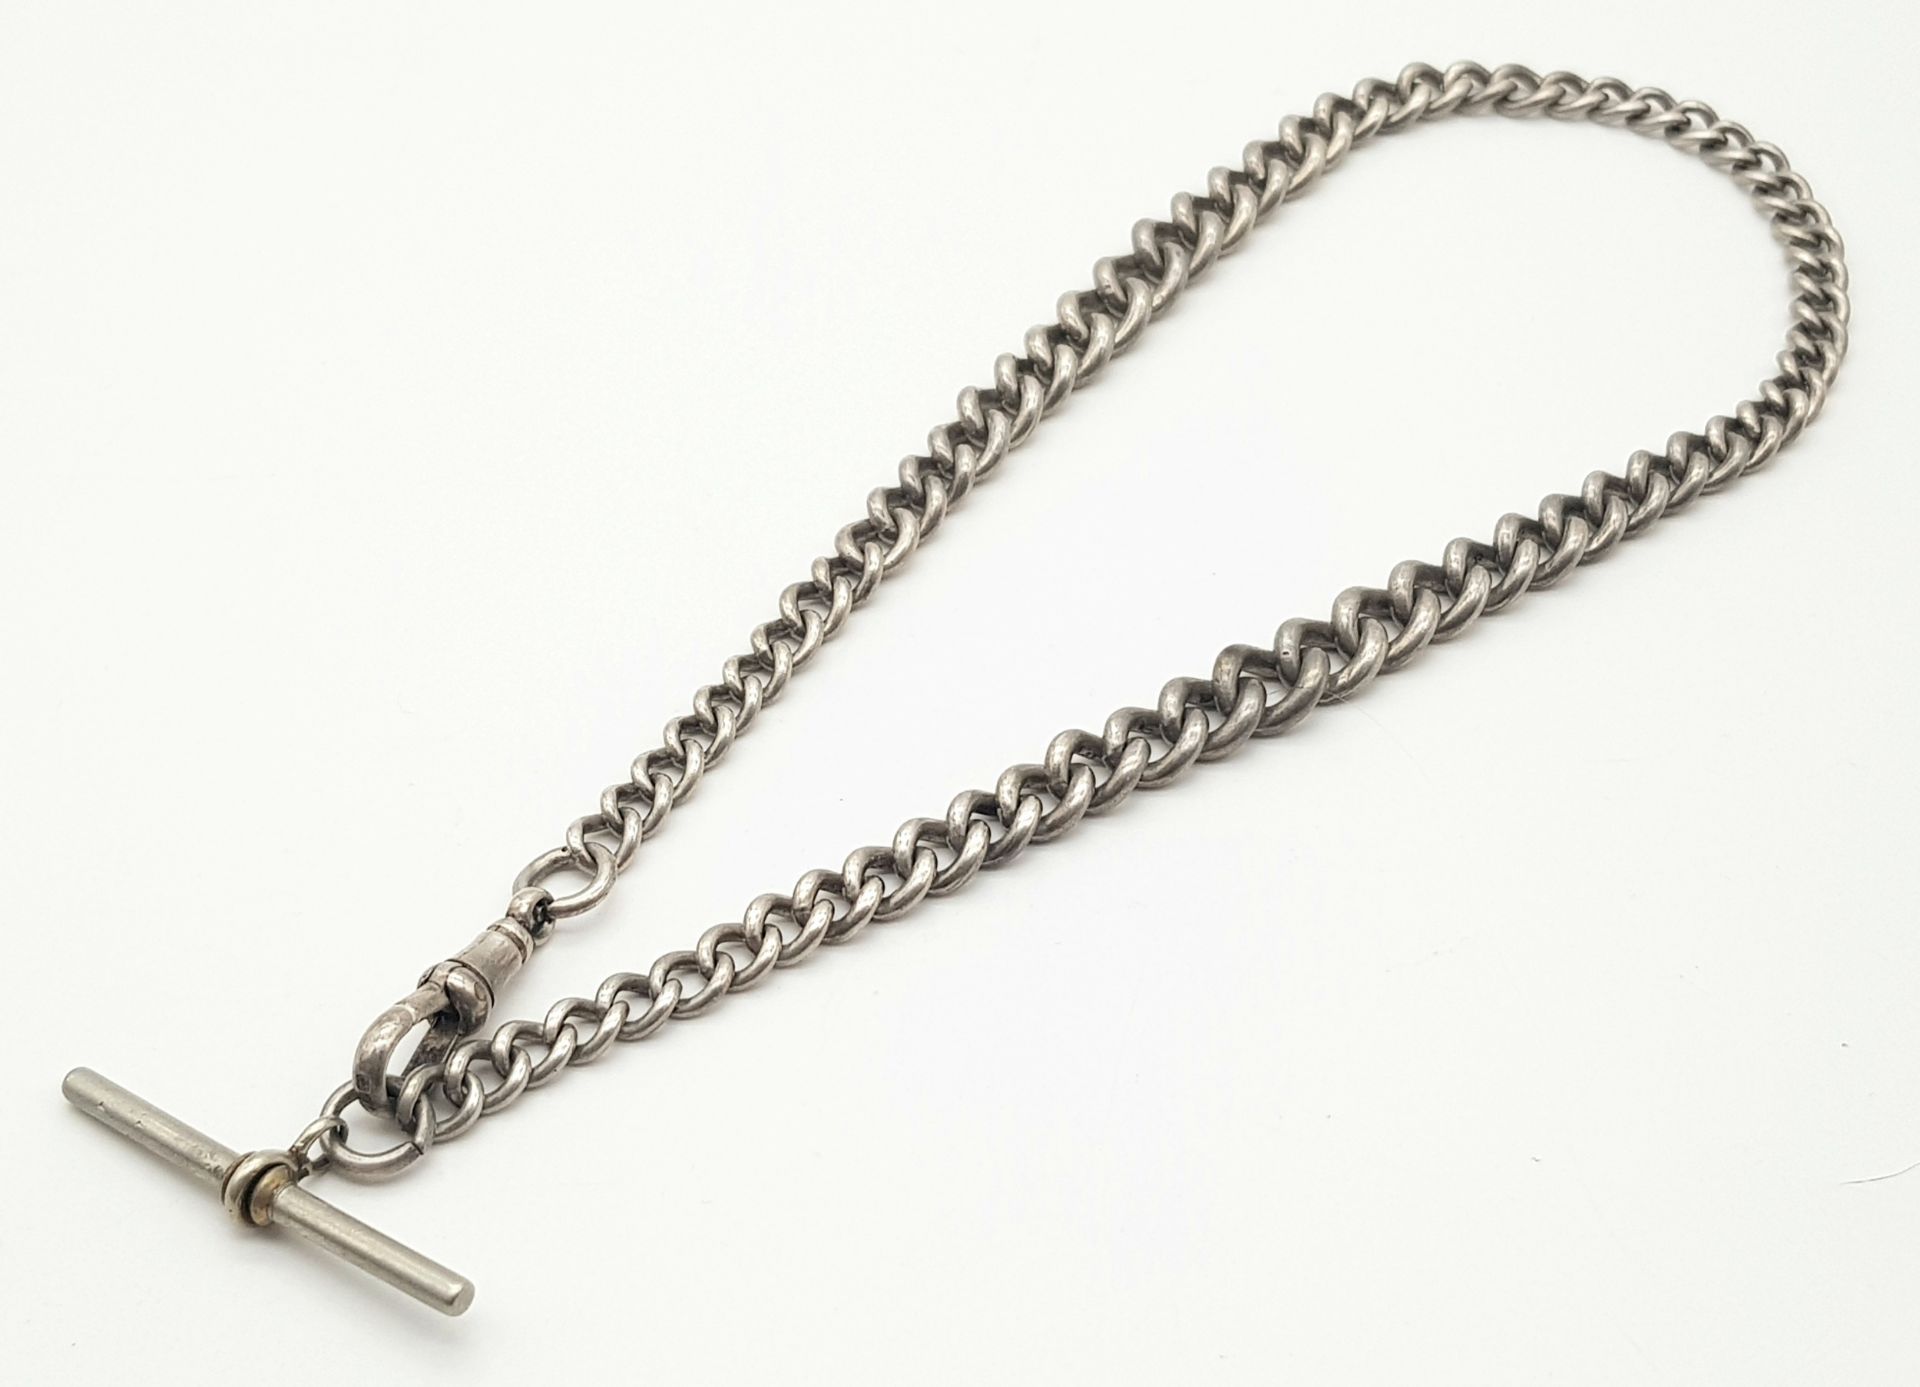 A Vintage/Antique Sterling Silver Albert Chain - Faded Hallmarks. 36cm length. 42g